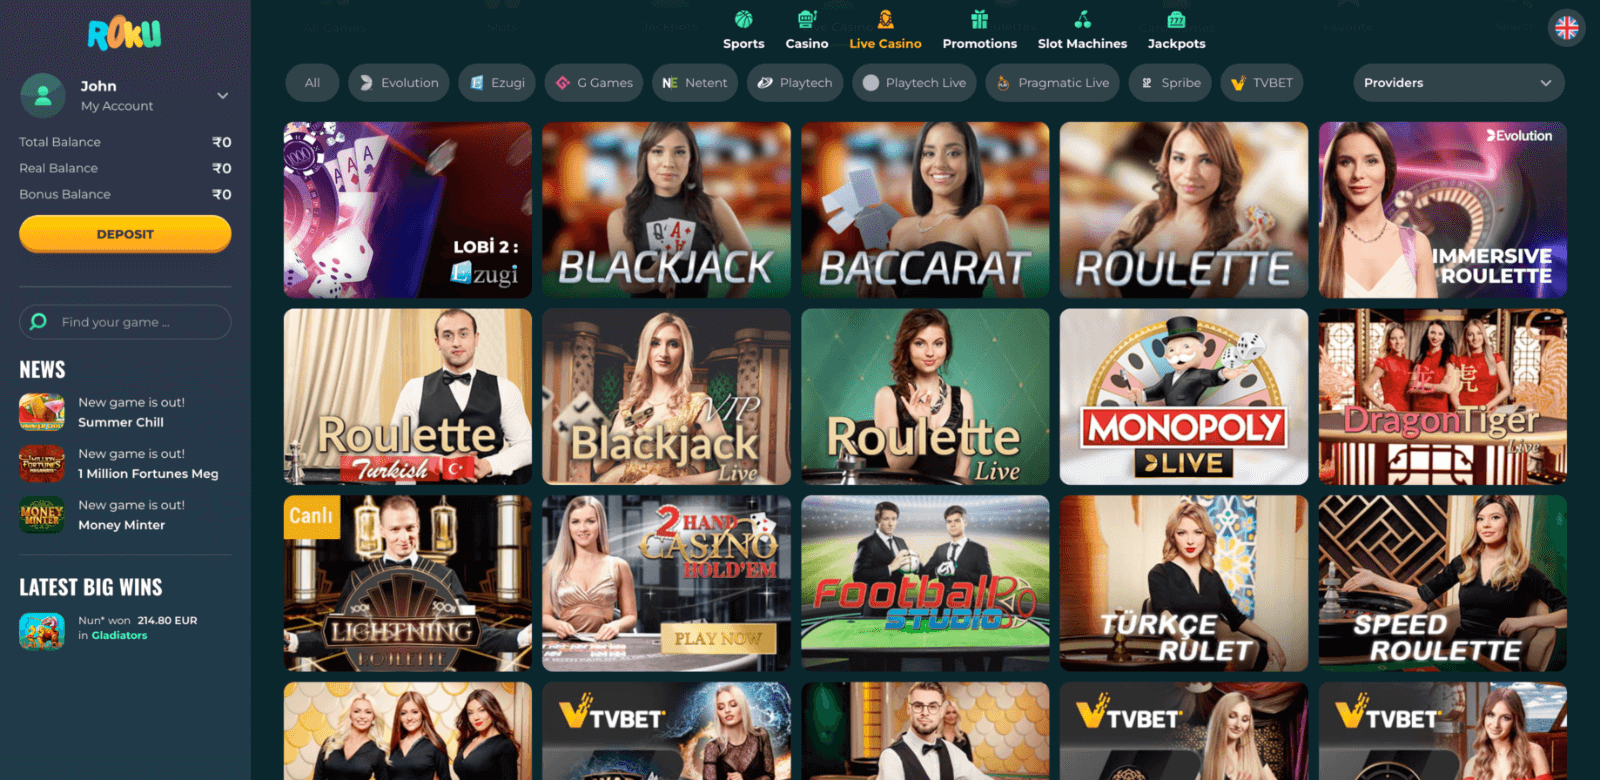 Live casino section on the Rokubet site